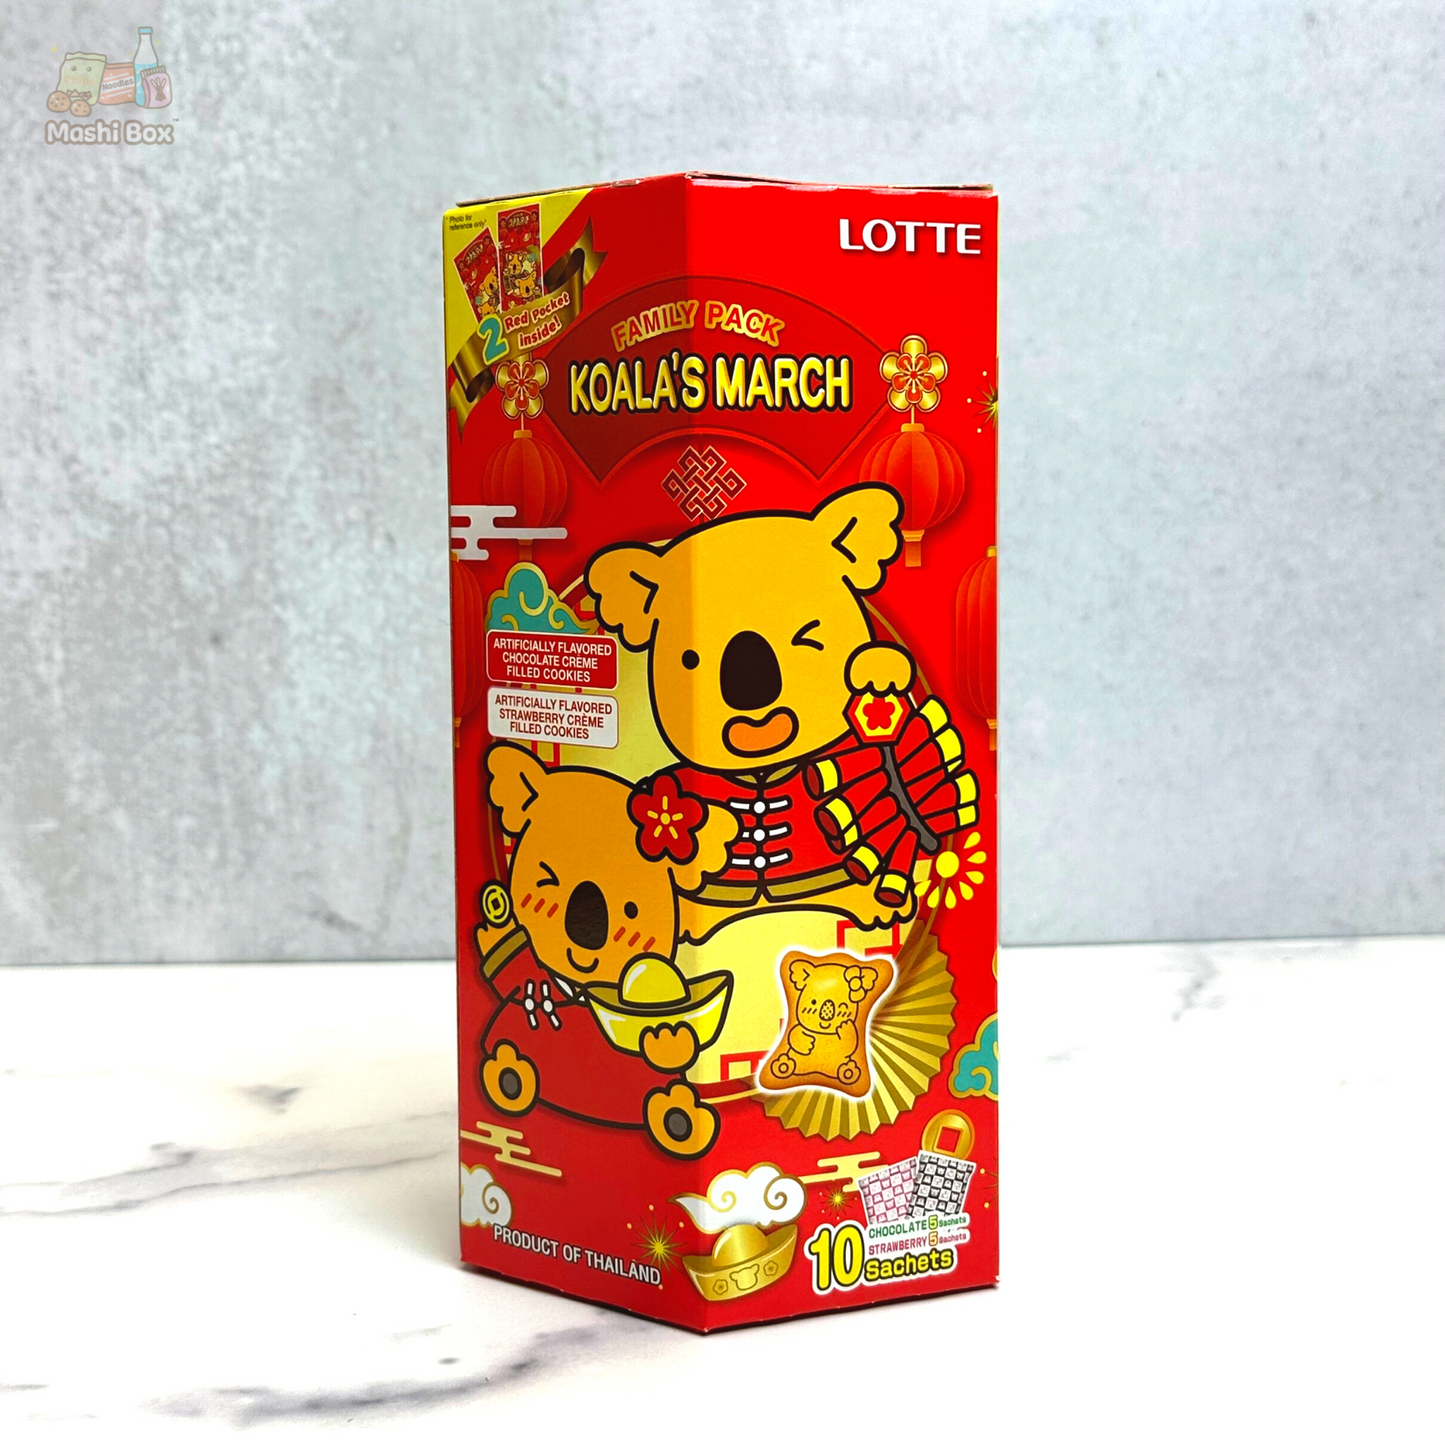 Lotte Lunar New Year Theme Koala's March Family Pack (10 Pieces)